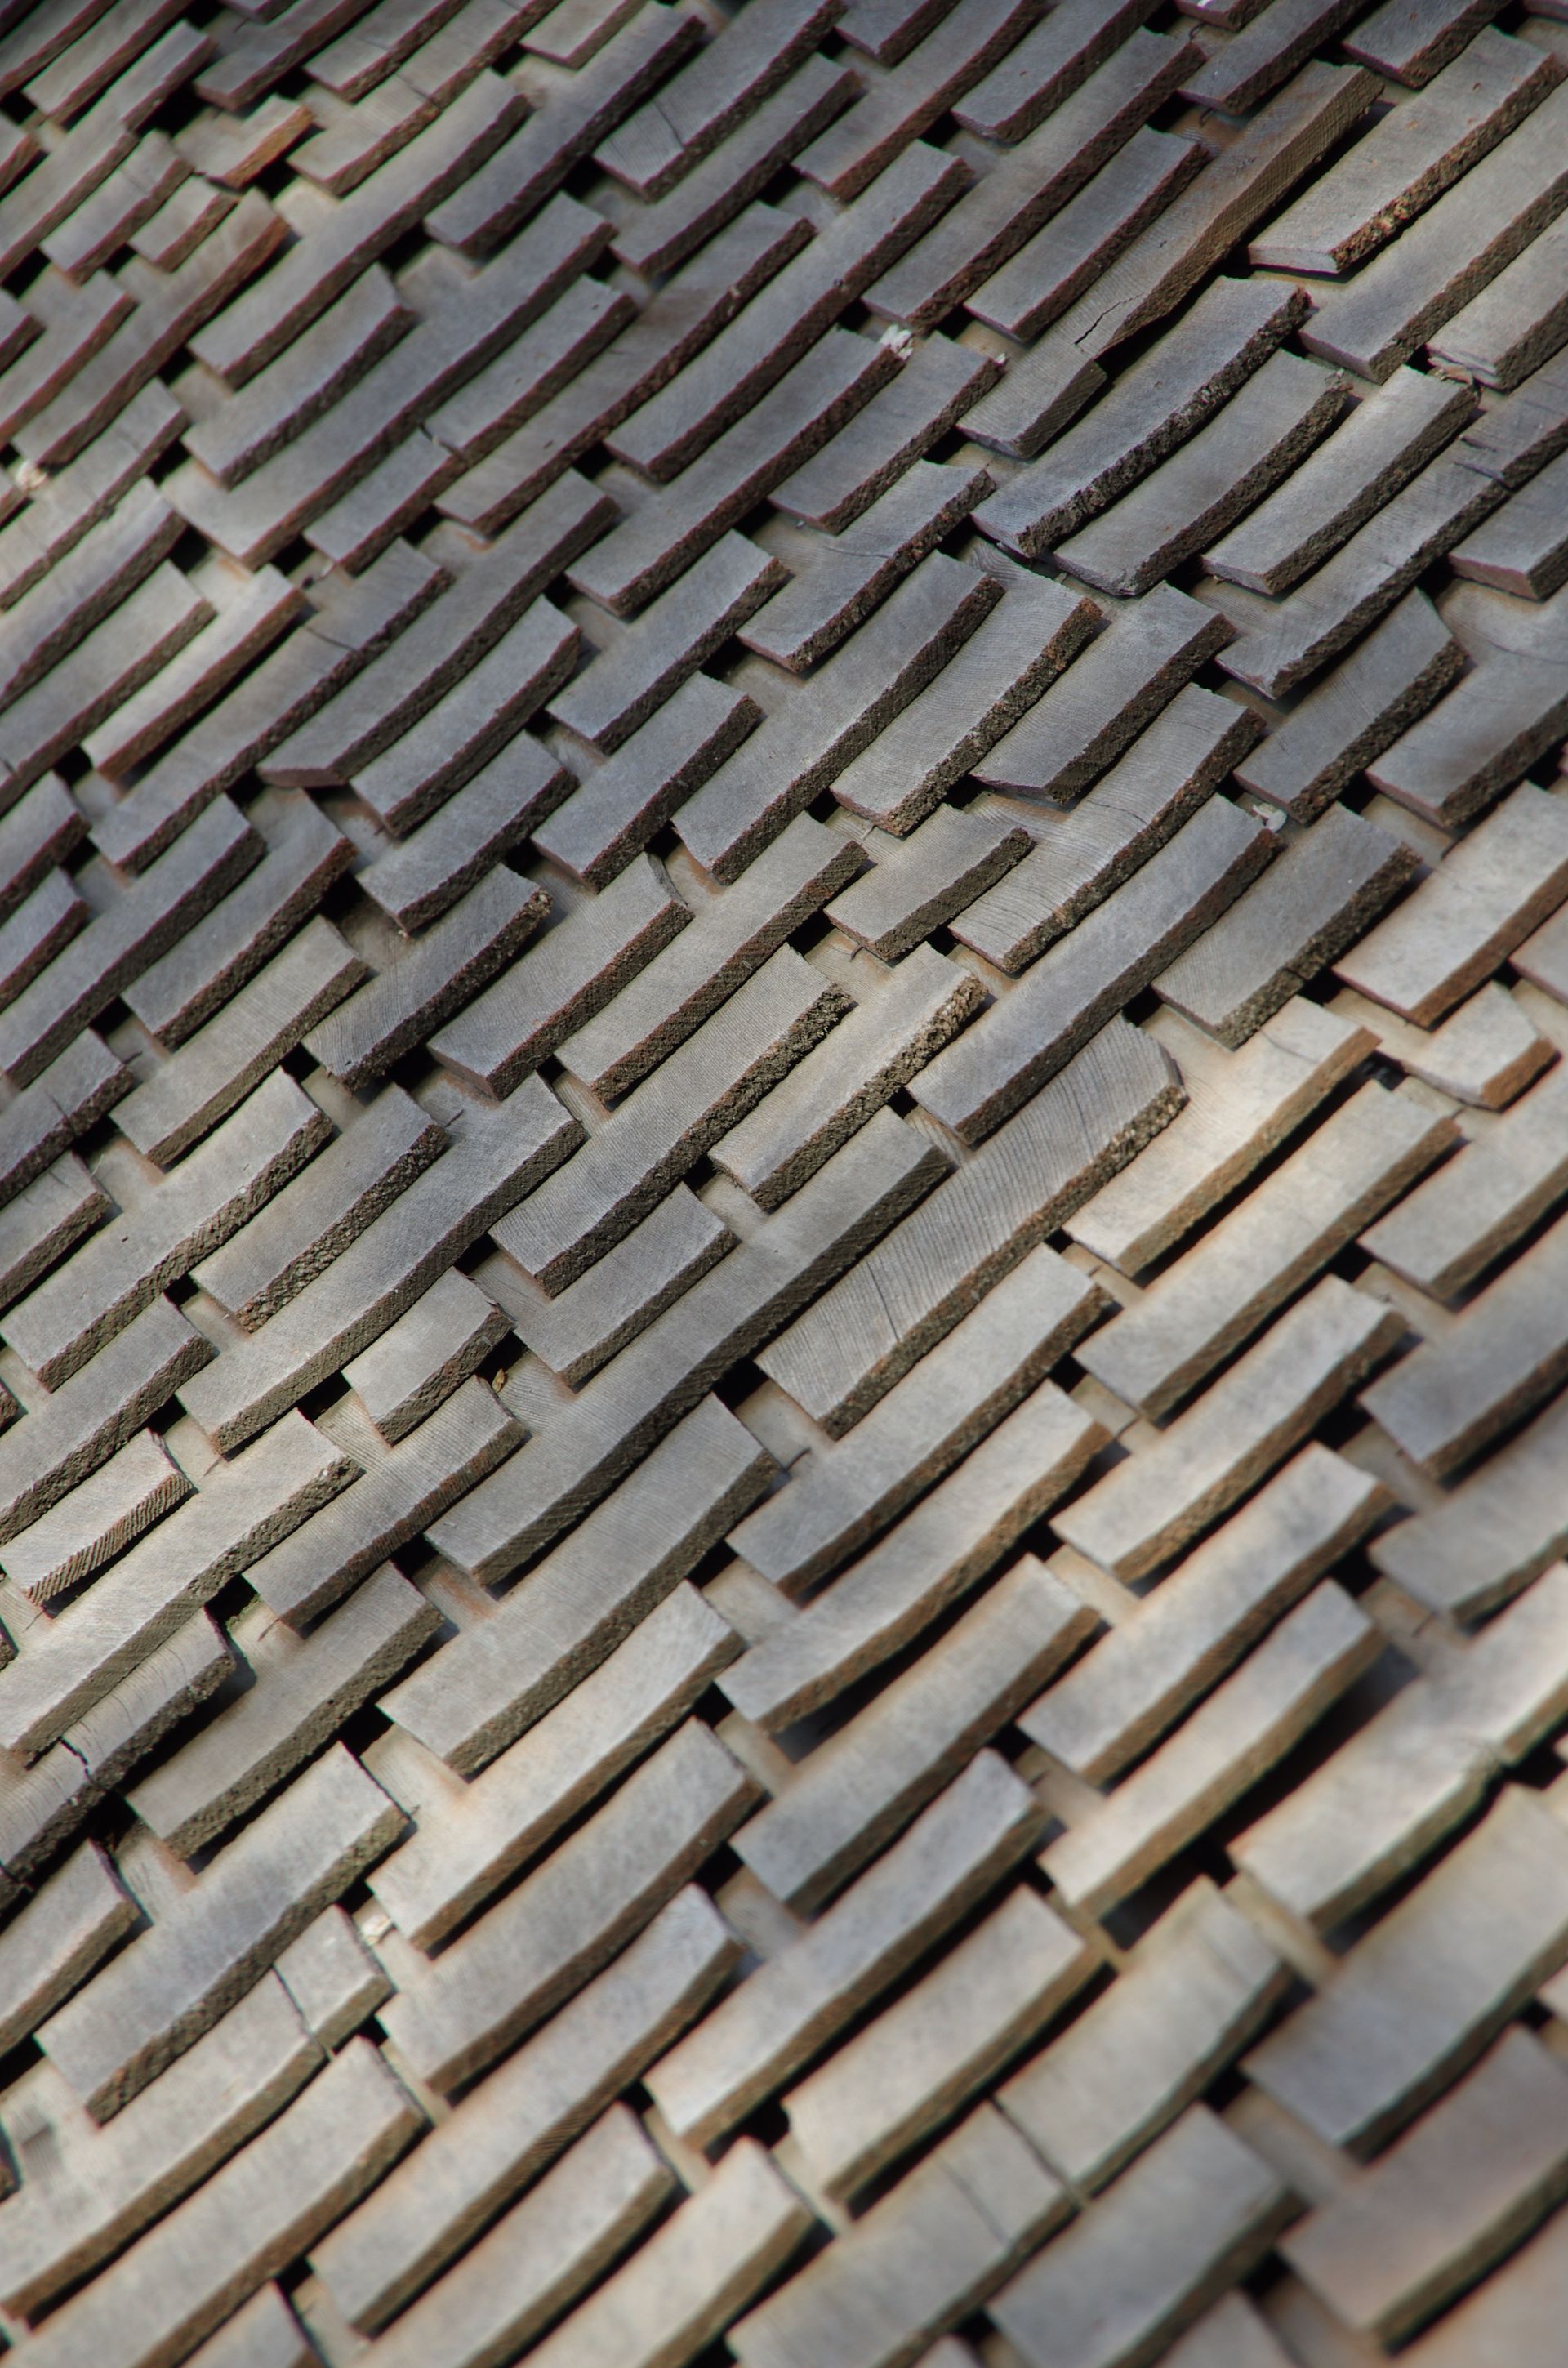 A pattern of gray wooden shingles neatly put together.